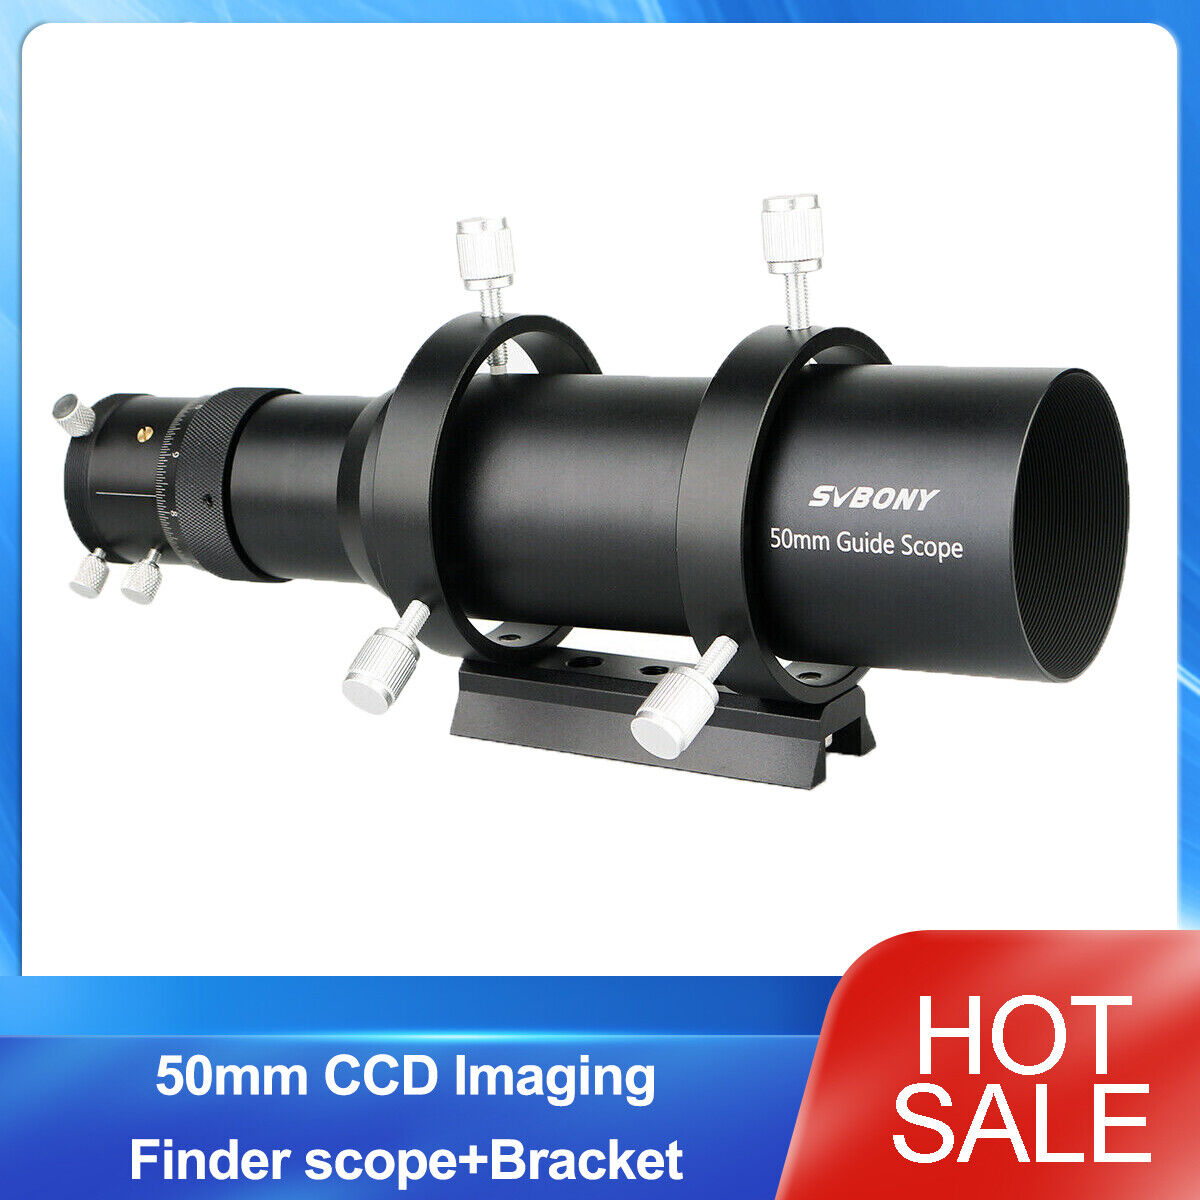 SVBONY 50mm Imaging Guide Scope Finderscope For CCD astronomy camera Telescope